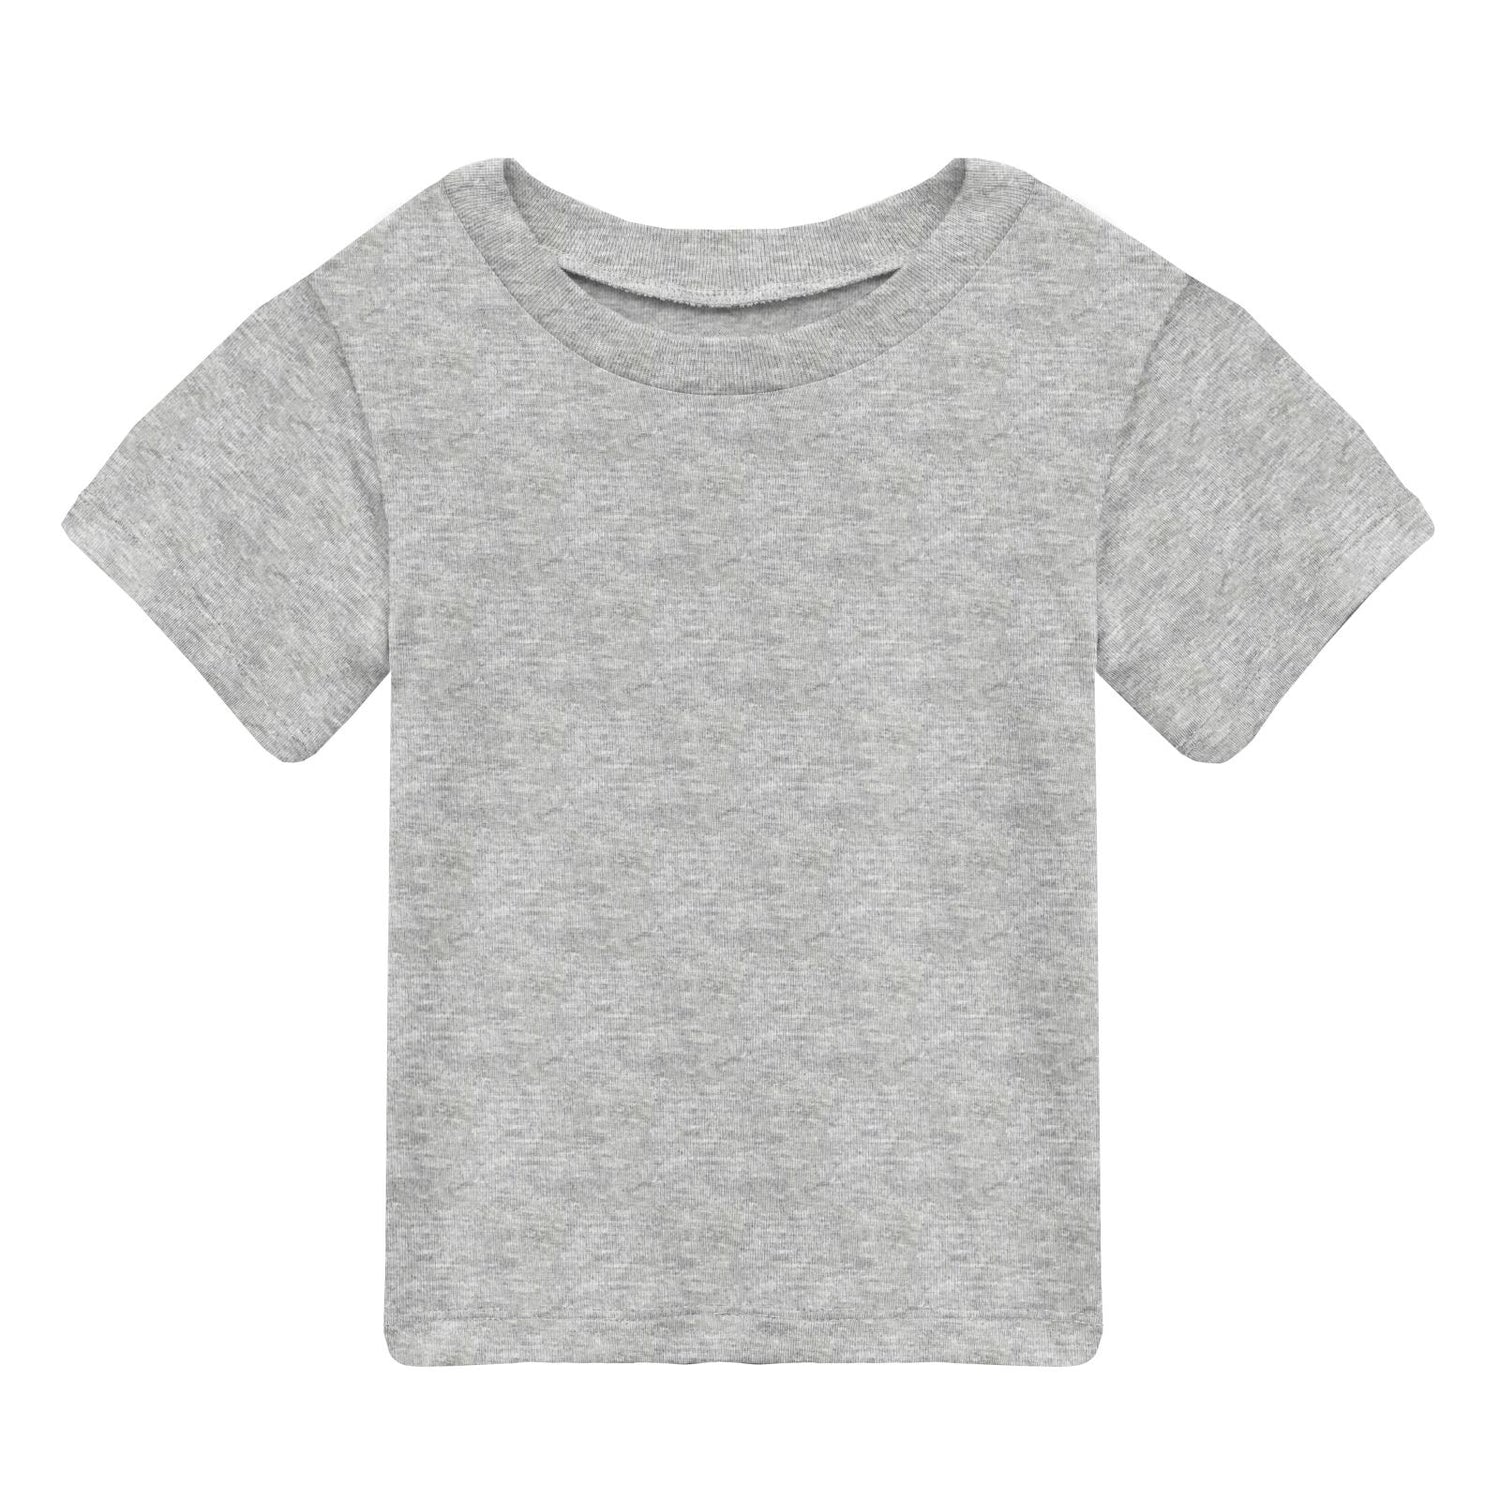 Short Sleeve Easy Fit Crew Neck Tee in Heathered Mist